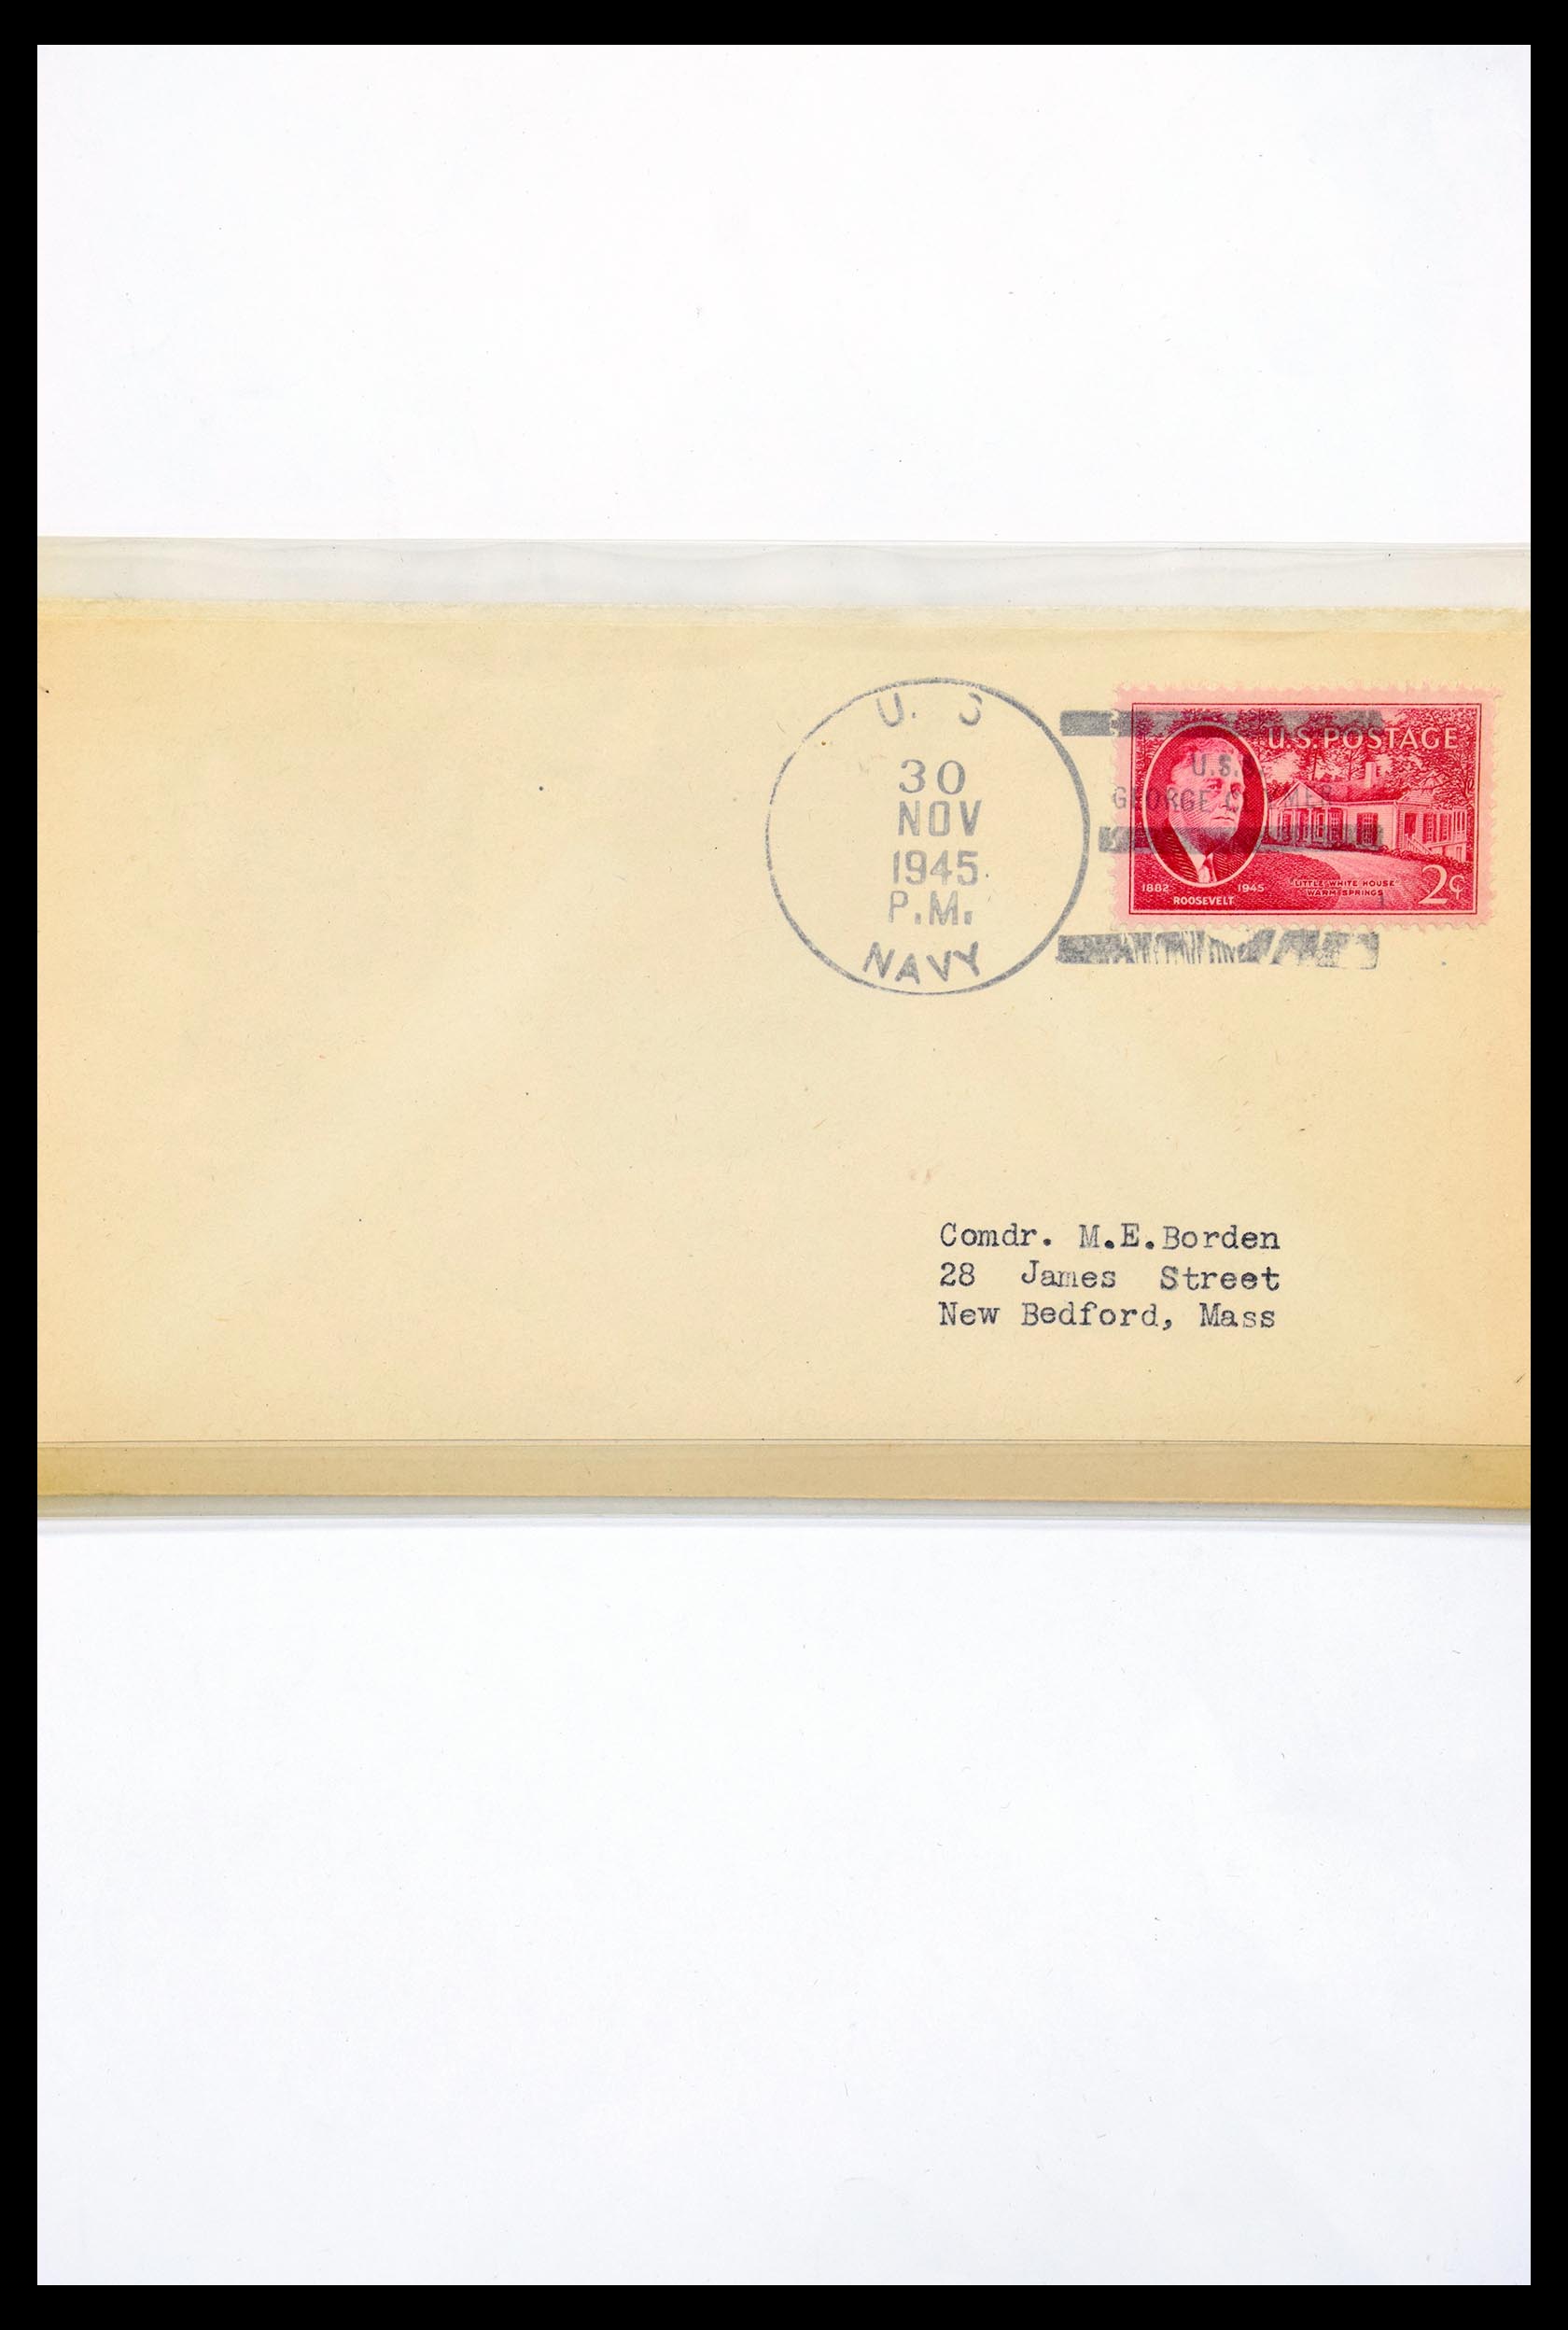 30341 305 - 30341 USA naval cover collection 1930-1970.